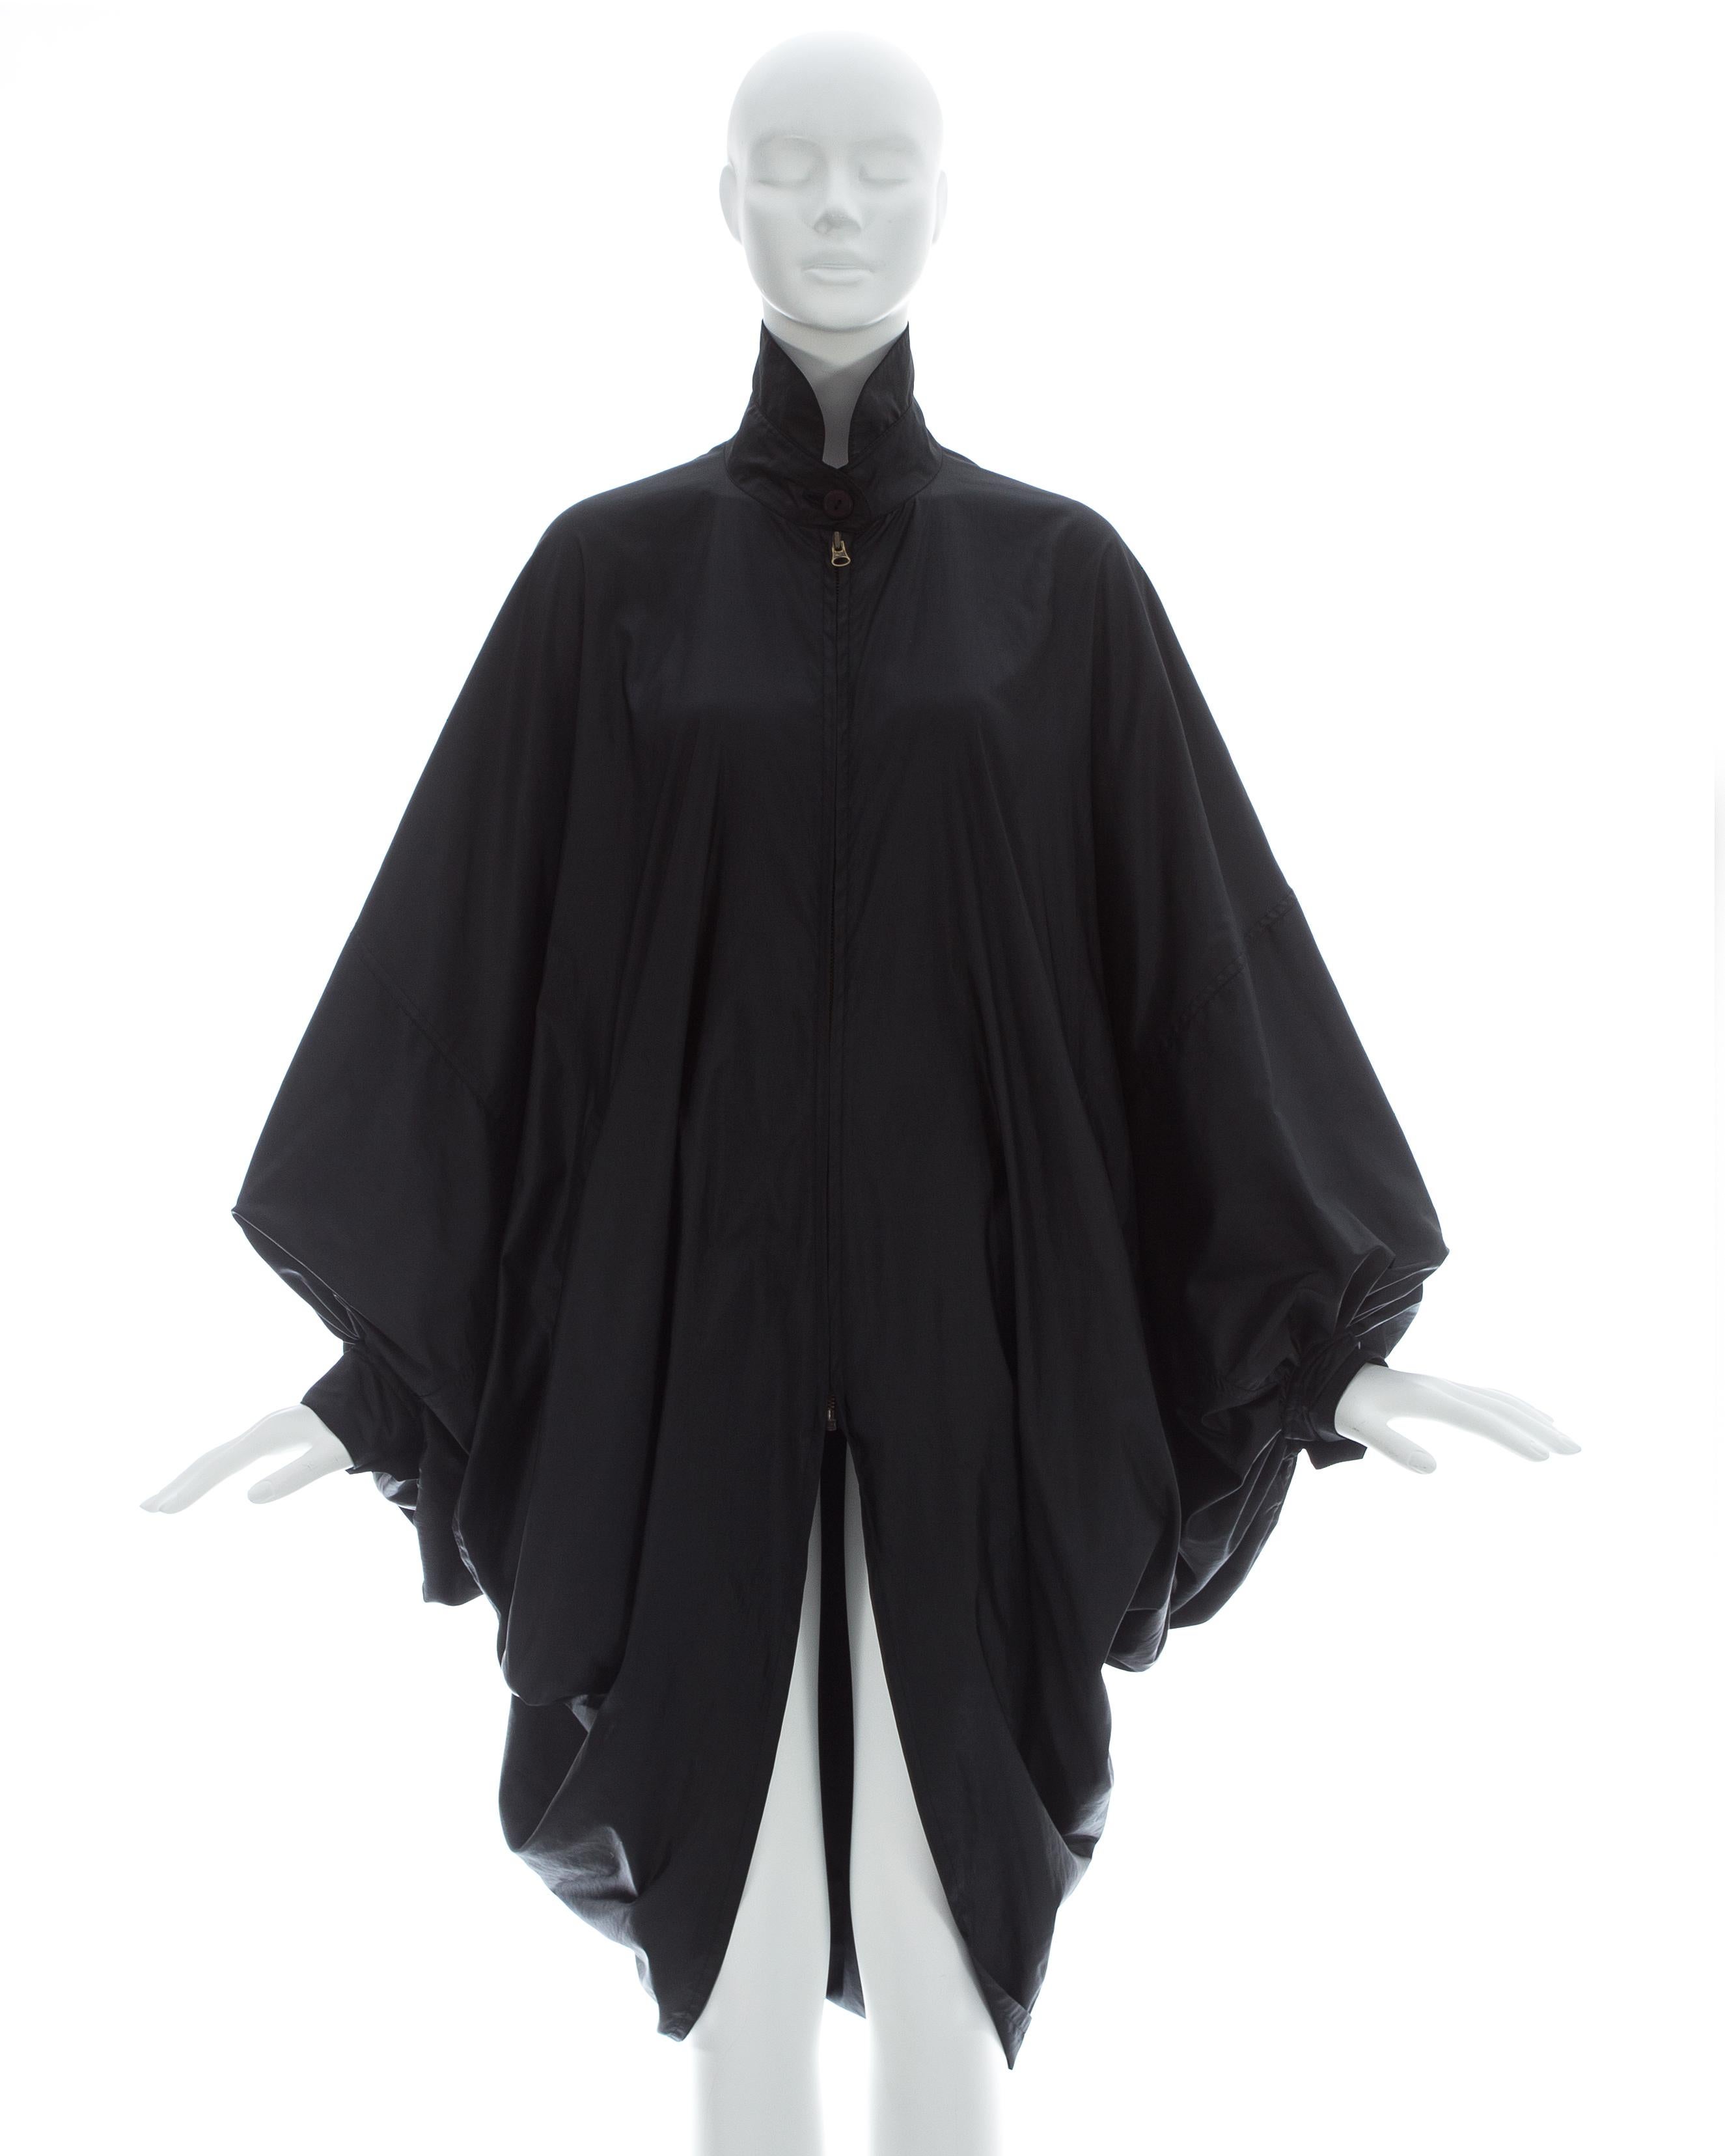 Issey Miyake; Black nylon oversized parachute coat with batwing sleeves and two front pockets

Fall-Winter 1987